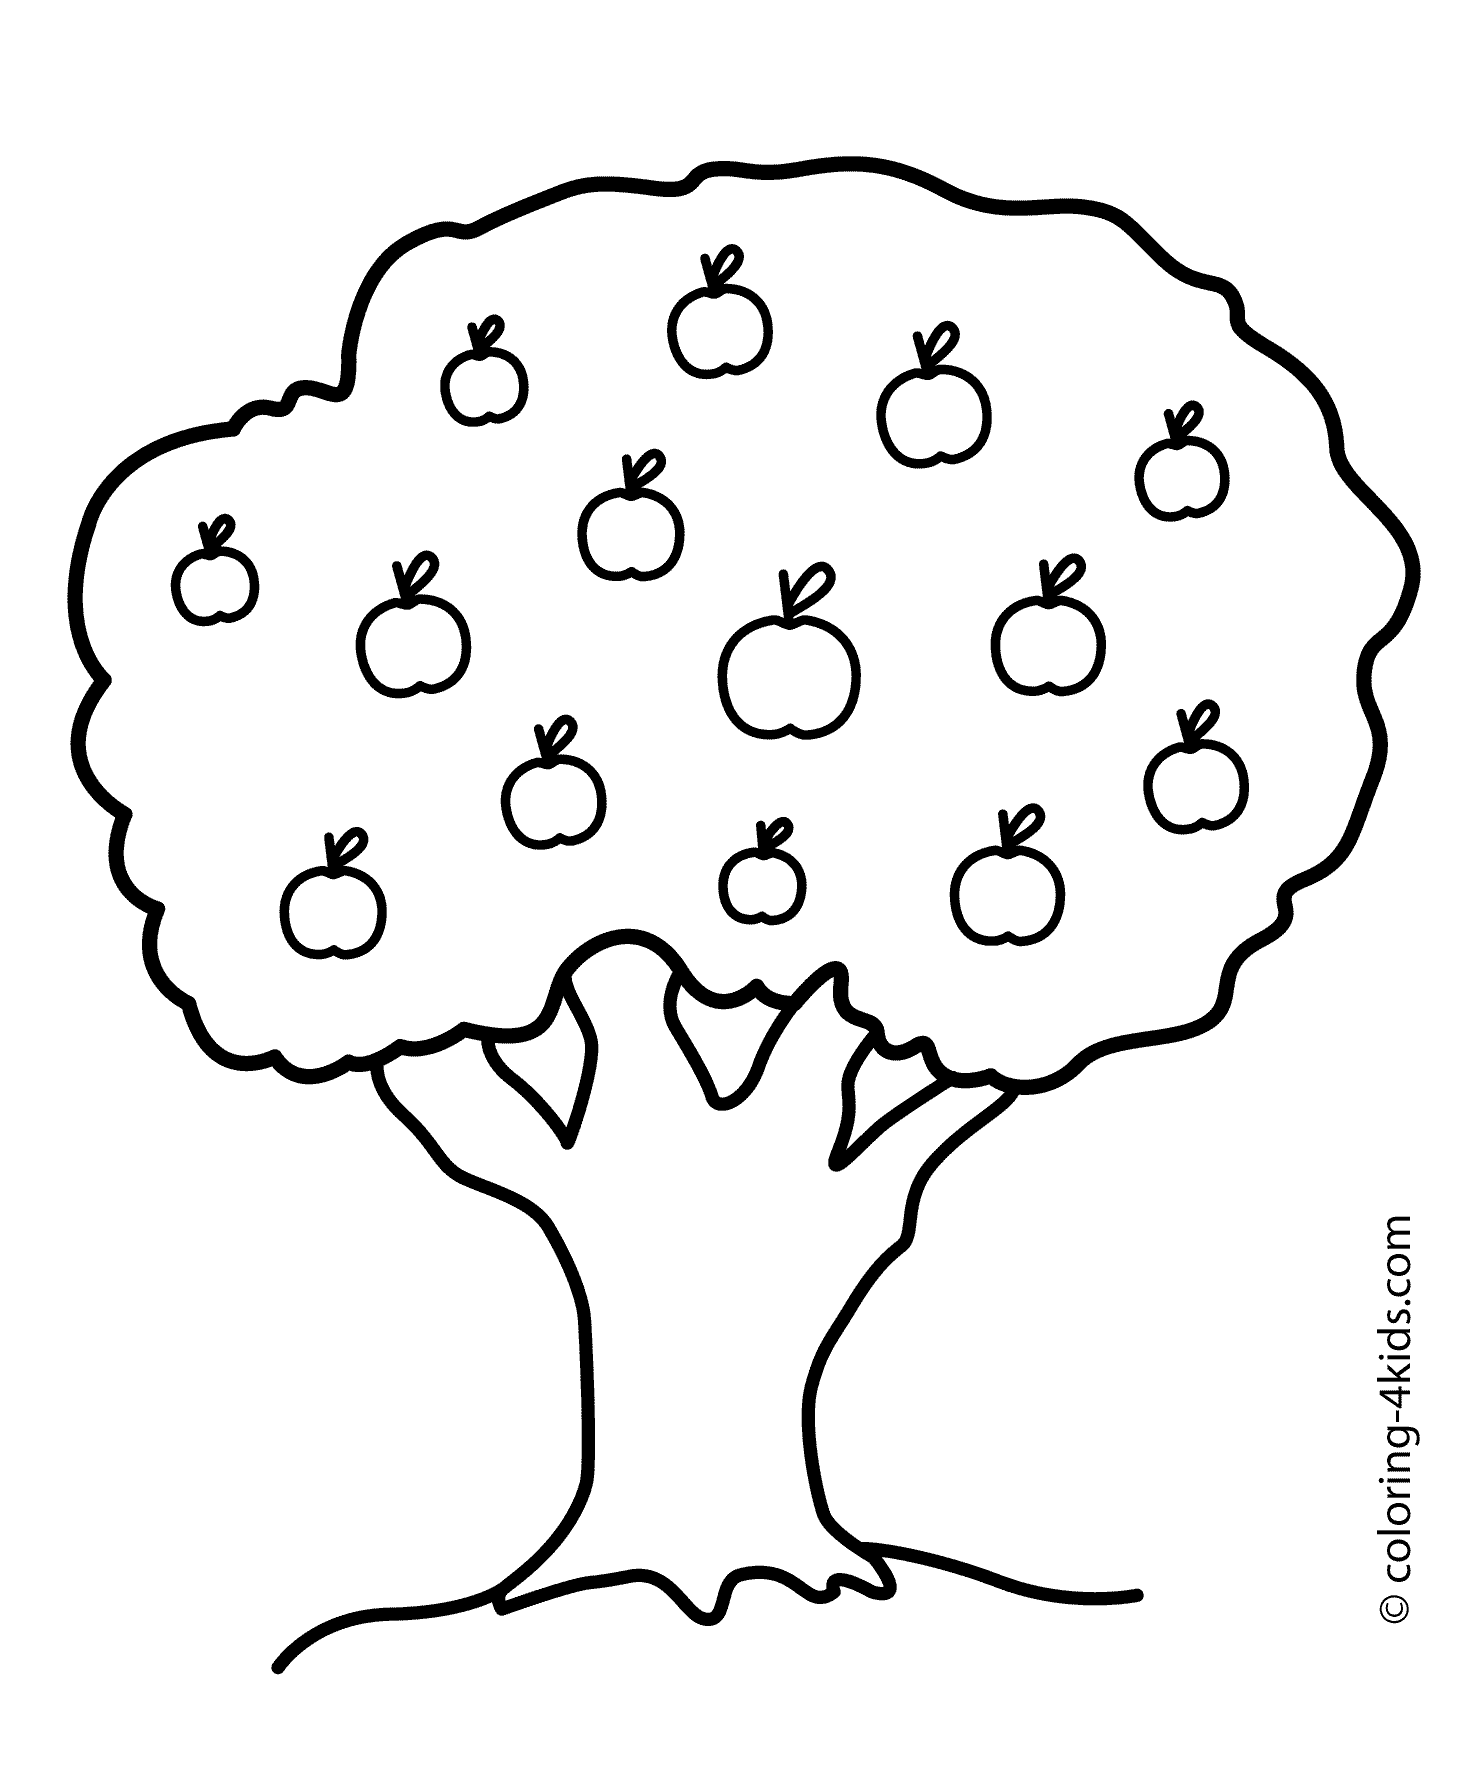 26 tree coloring page to print | Print Color Craft